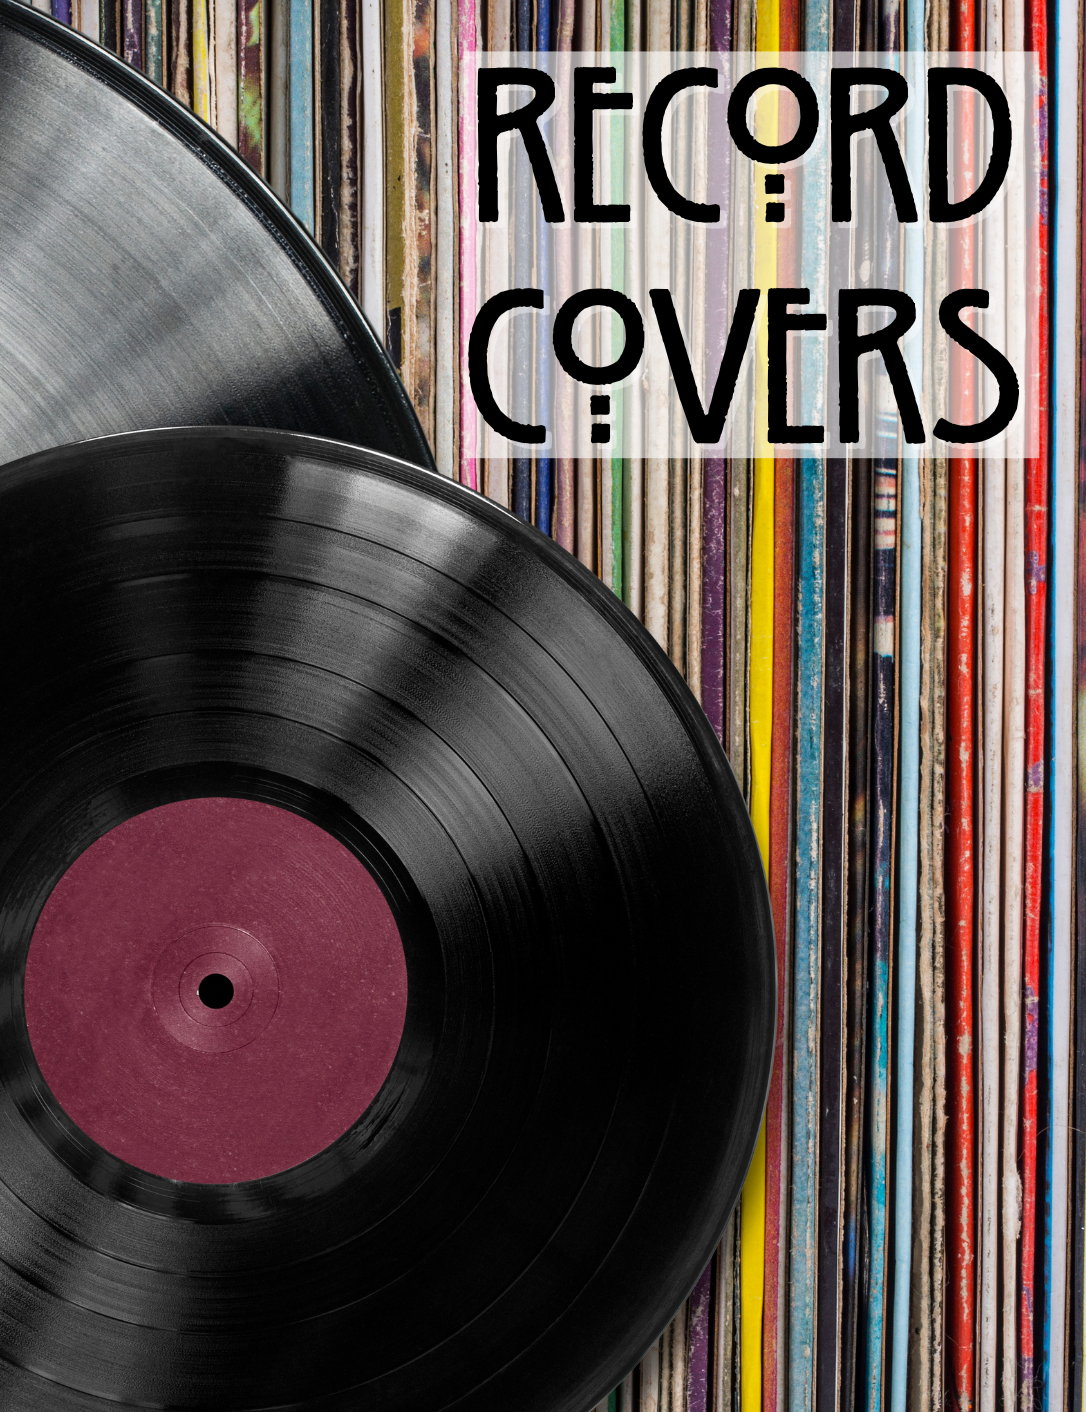 Miniature Record Covers